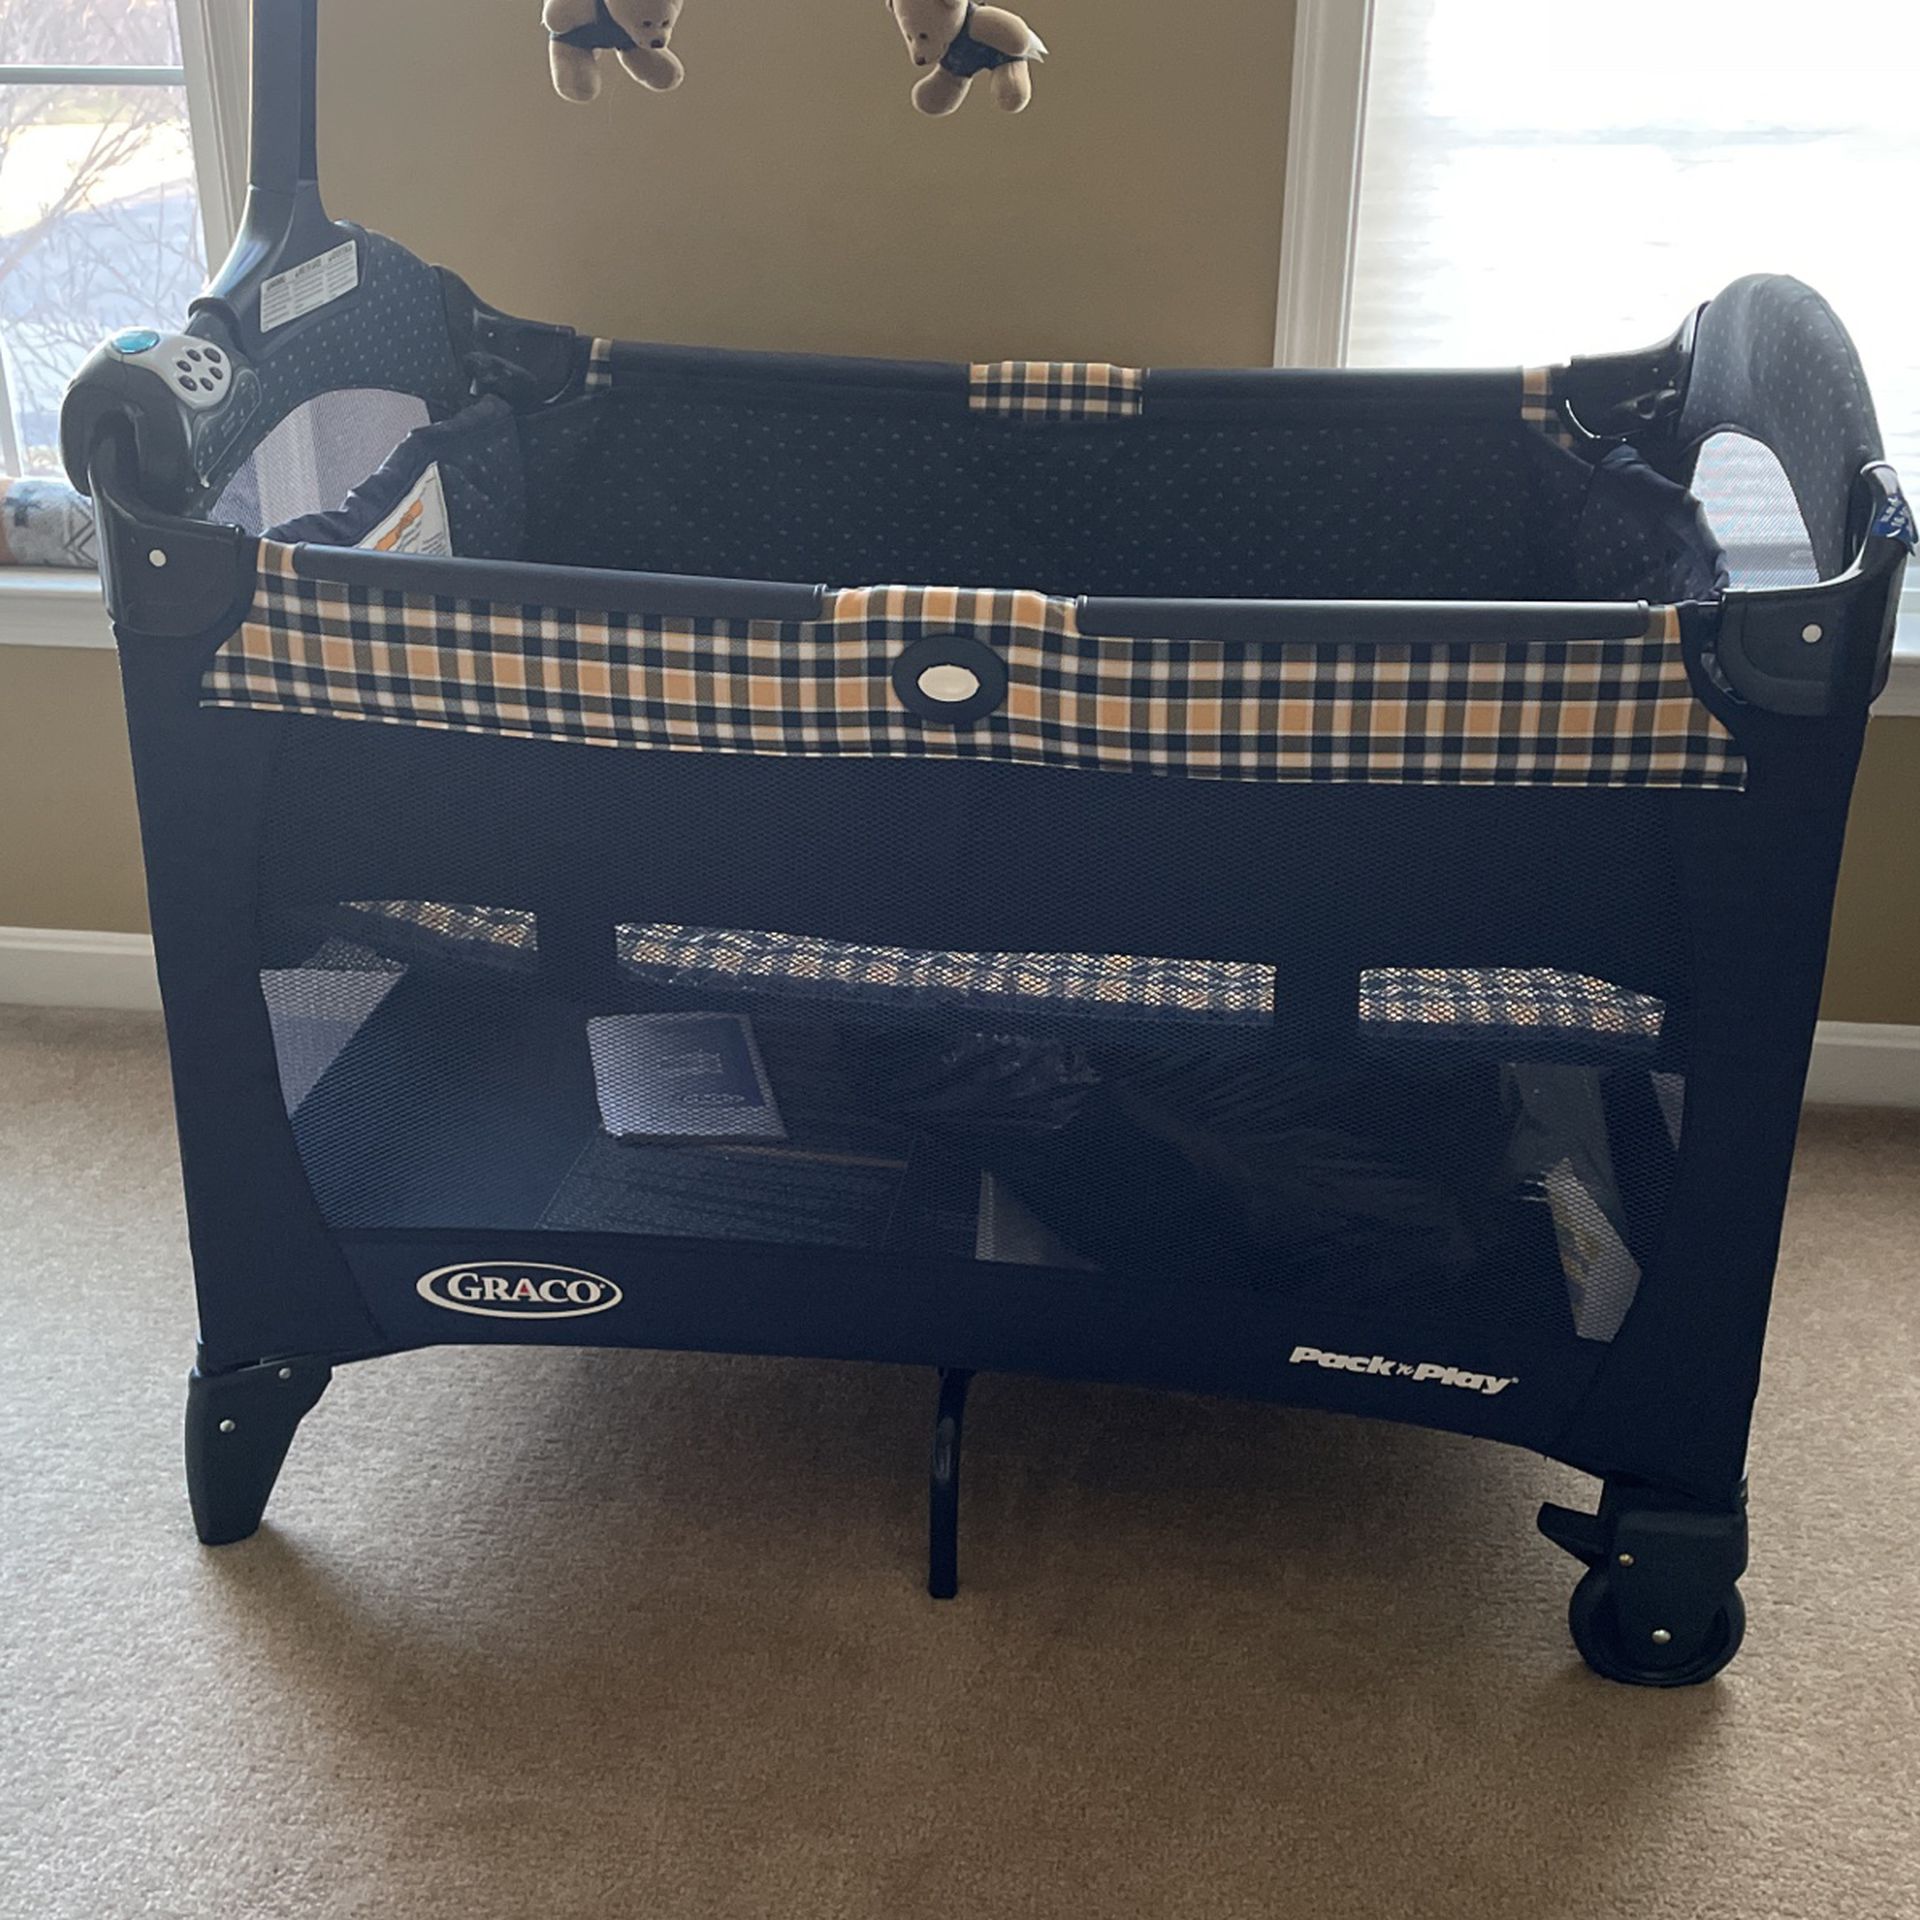  Kids Playpen / Playard for Sale  -portable With Cover Easy to carry with Attachments!!